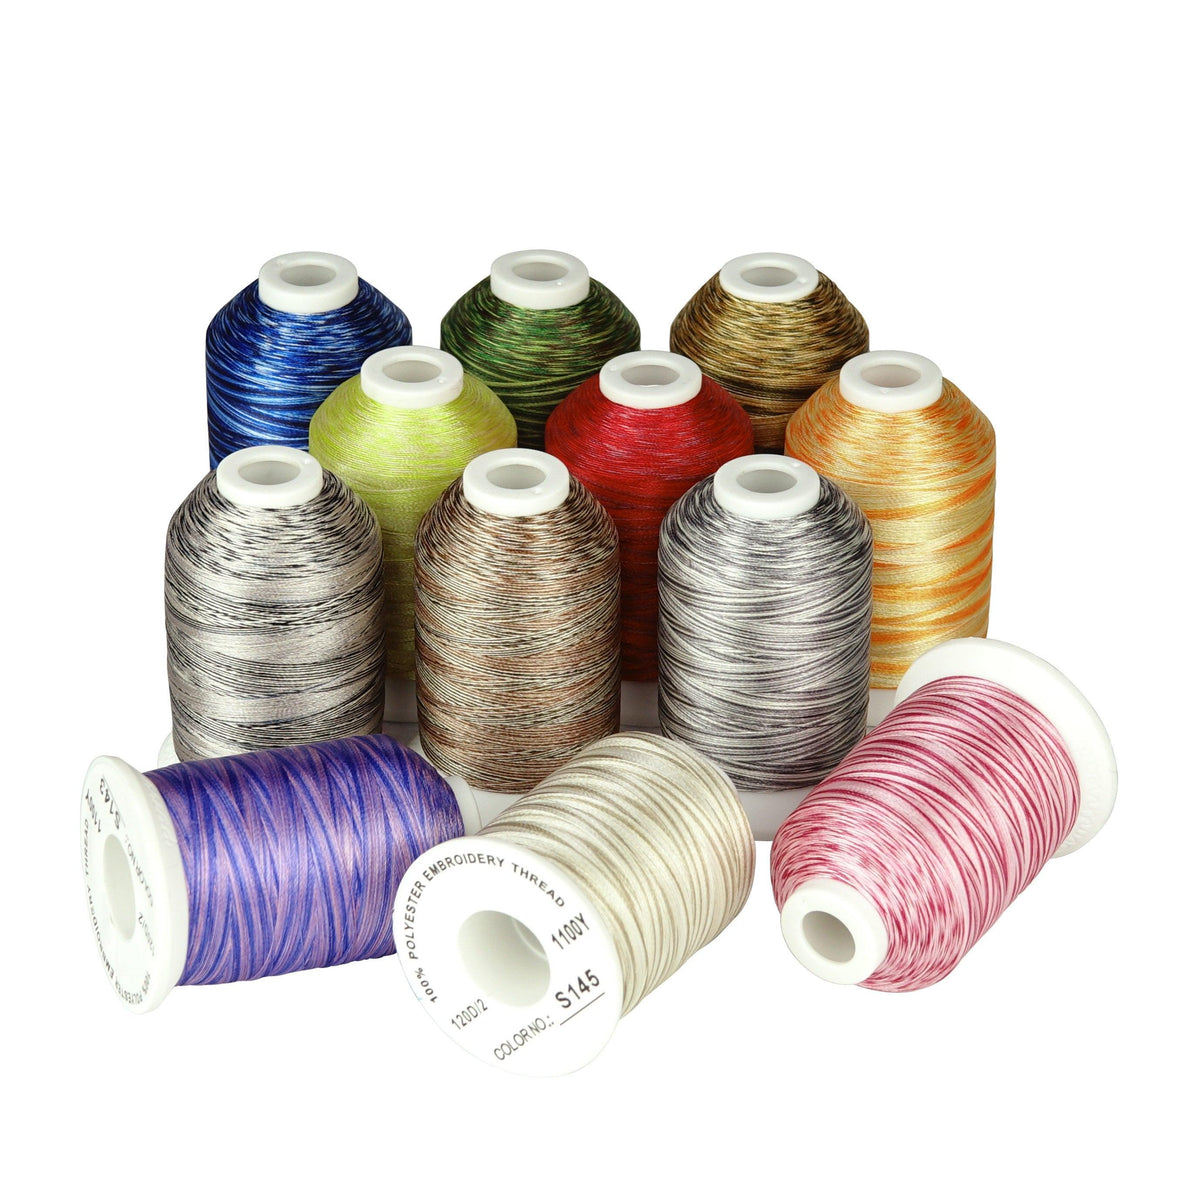 Simthread 12 multi Colors Variegated Embroidery Sewing Thread set —  Simthread - High Quality Machine Embroidery Thread Supplier